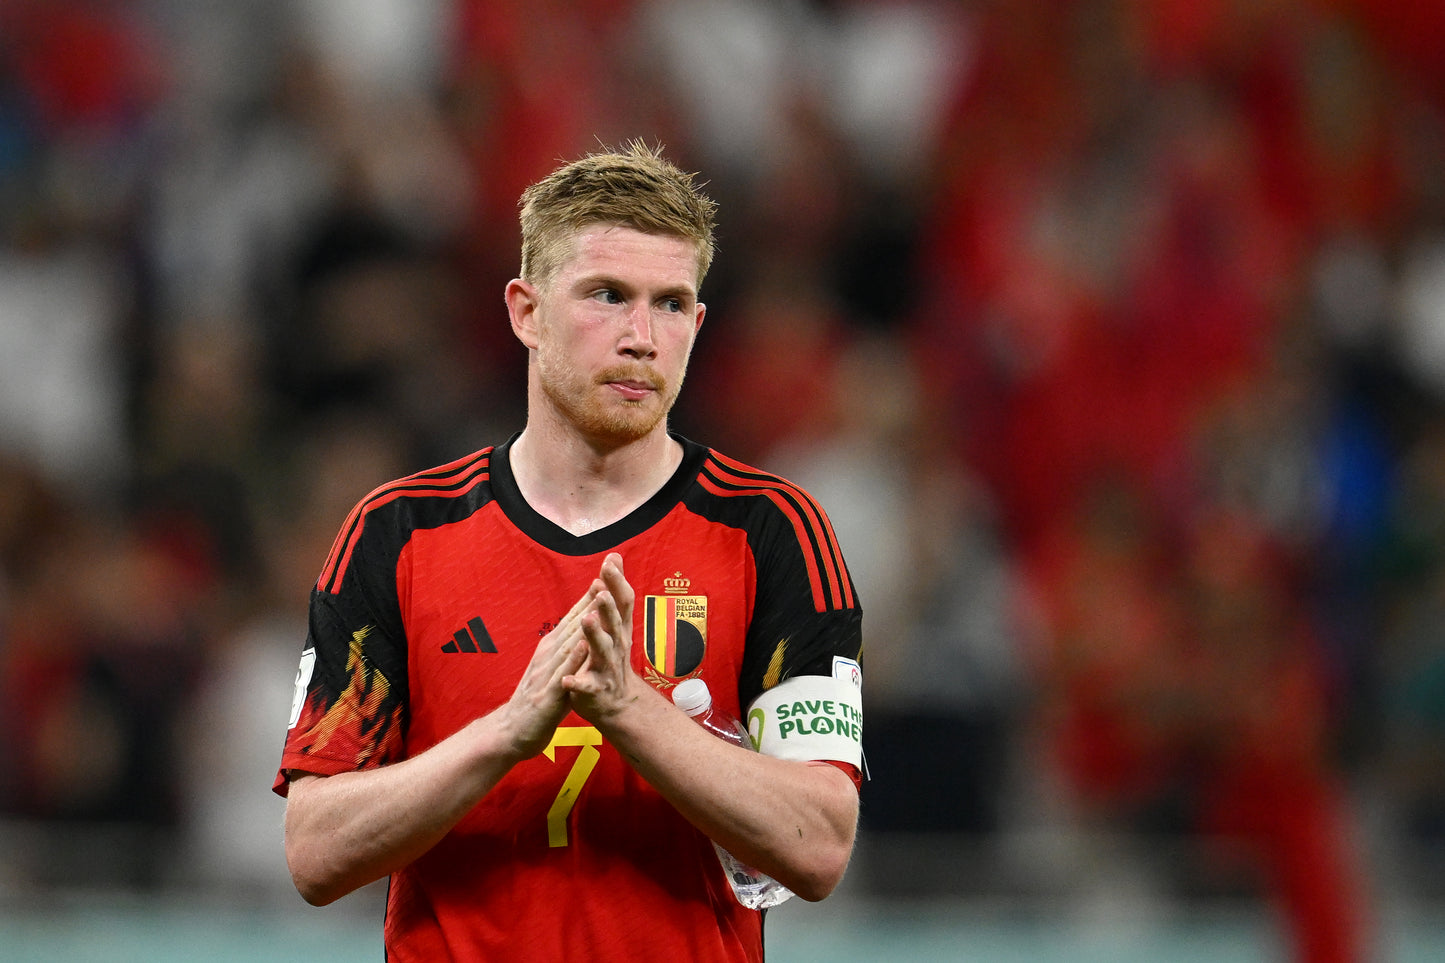 Kevin De Bruyne Belgium National Soccer Team 2022 World Cup Adidas Authentic Home Fan Version Jersey - Red